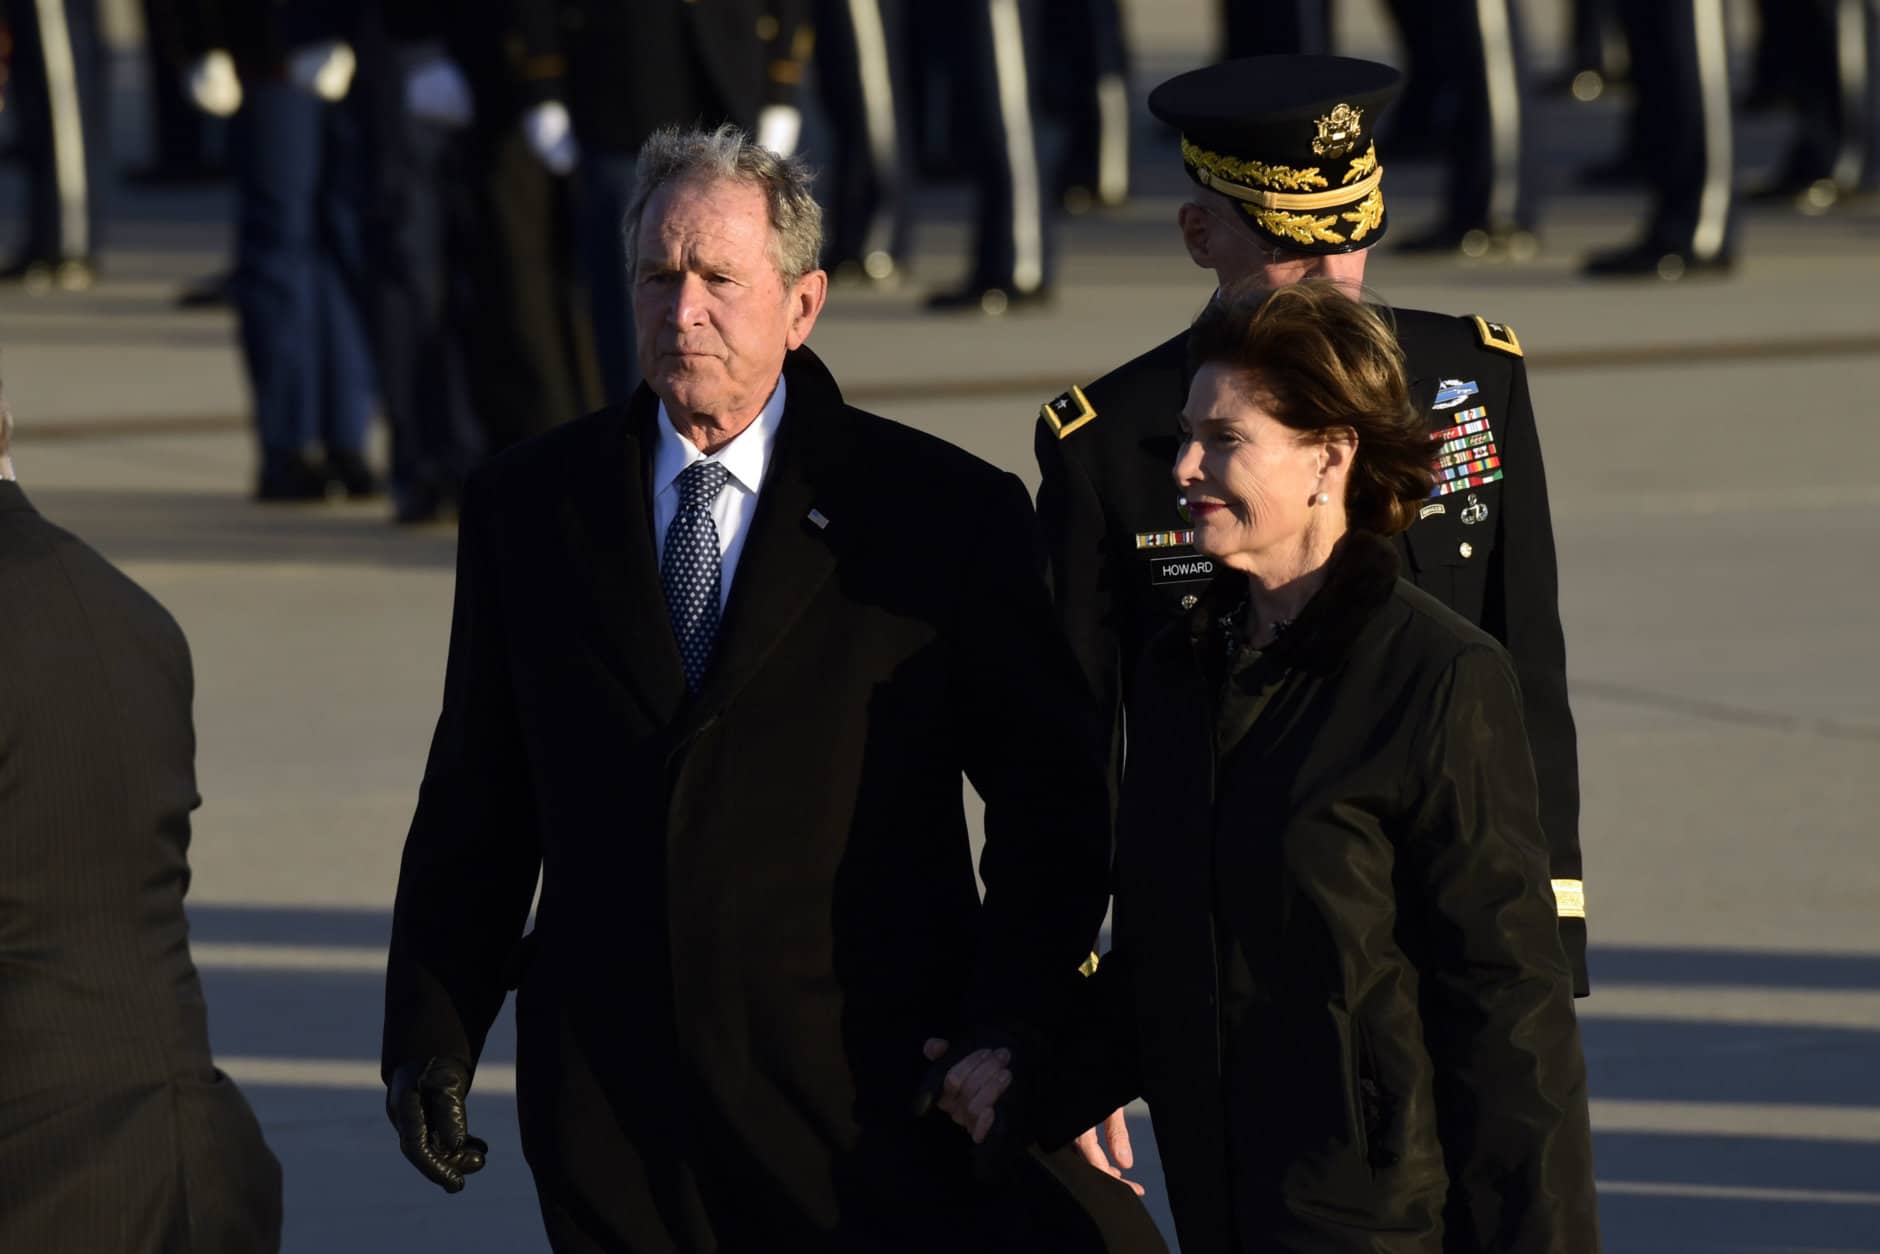 Former President George W. Bush and former first lady Laura Bush arrive at Andrews Air Force Base in Md., Monday, Dec. 3, 2018, escorting the flag-draped casket of former President George H.W. Bush. (AP Photo/Susan Walsh)